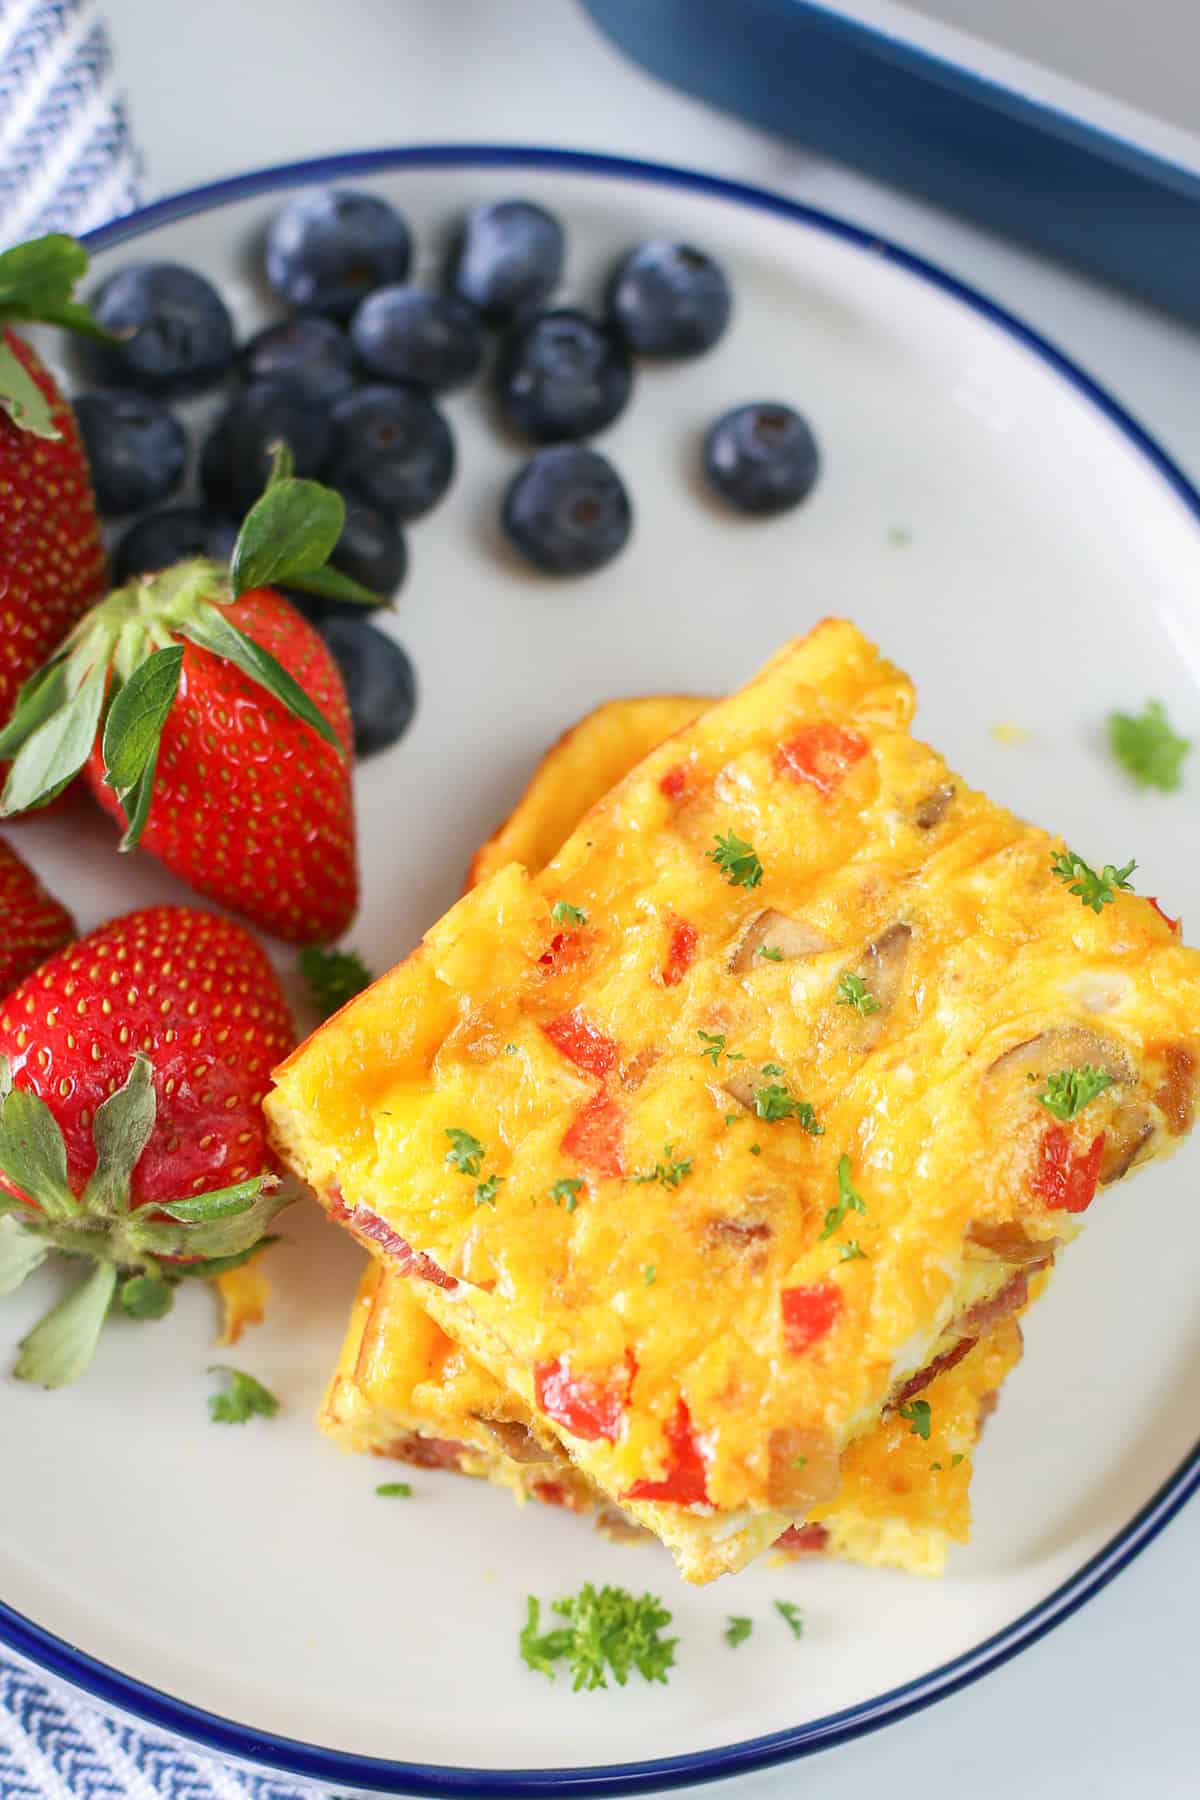 Baked Omelette slice on a plate with strawberries and blueberries.